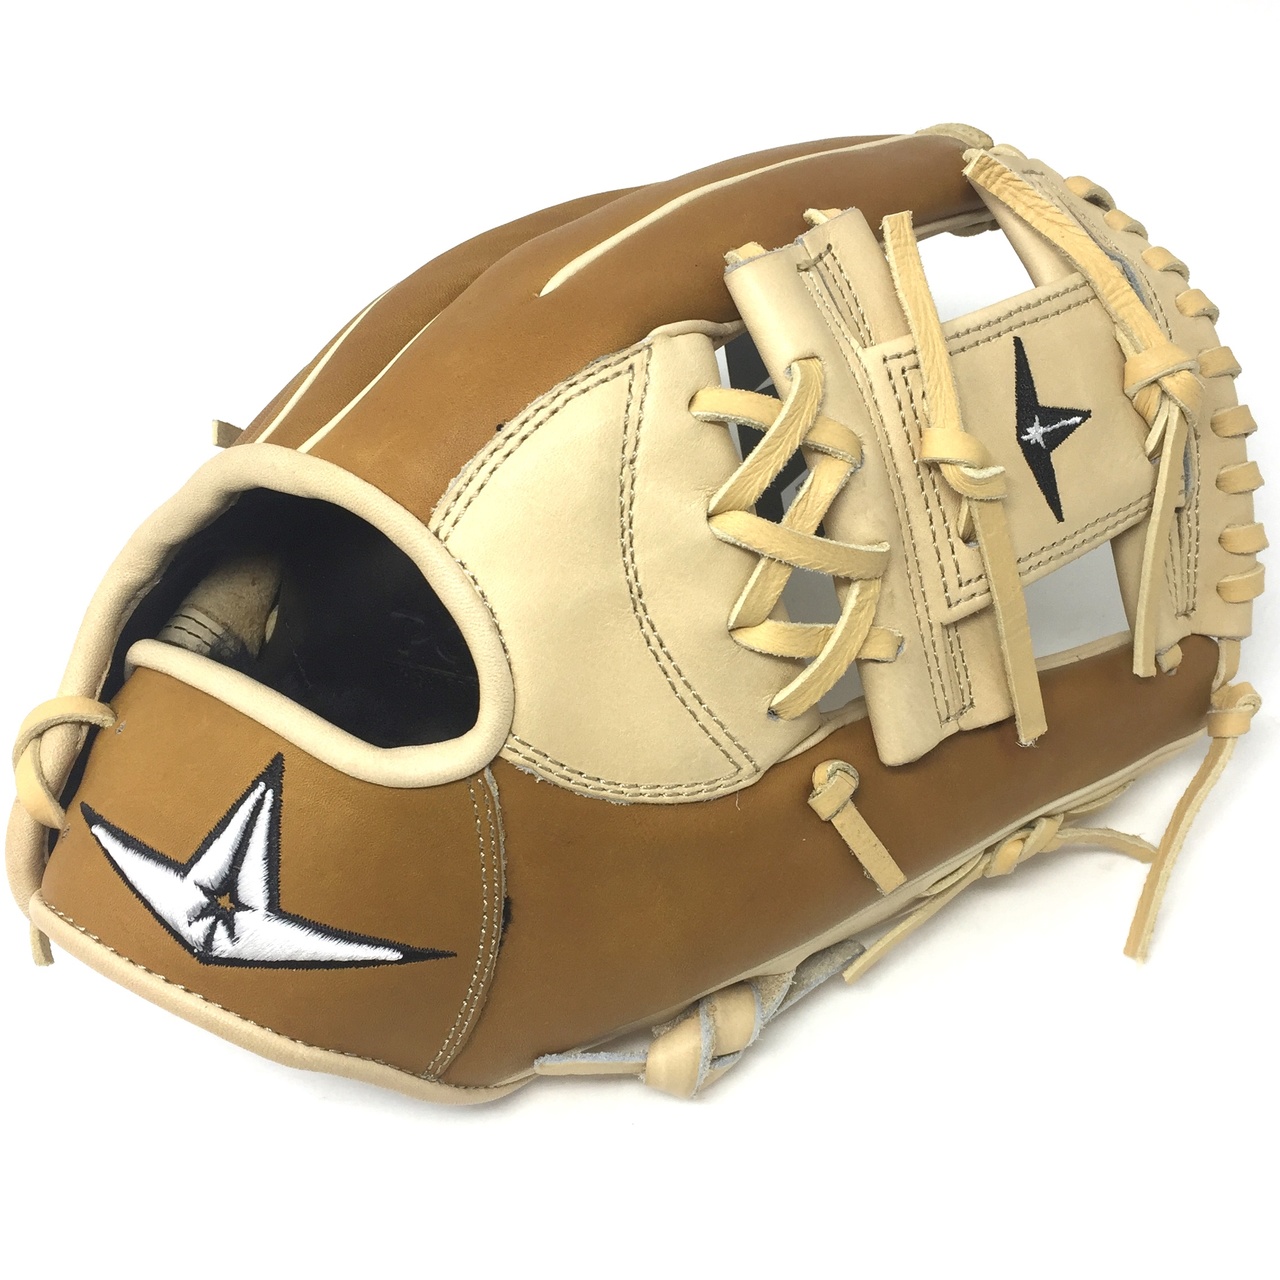 What makes Pro Elite the most trusted mitt behind the dish can now be had all across the diamond. A natural addition to baseball’s most preferred line of catcher’s mitts, Pro Elite fielding gloves provide premium level materials, patterns, and feel for all positions. Exclusive Japanese tanned steer hide delivers a fast, custom break-in with professional level durability and performance. The world-class, Pittard’s leather palm lining delivers a buttery soft feel making the glove feel like a natural extension of the hand. - 11.5 Inch Model - I Web - Conventional Open Back - Professional Grade, Japanese Tanned Leather - Rolled Welting for longer lasting shape and durability - World-class, Pittard’s leather palm lining - Easy Break-In - Long Lasting Durability.